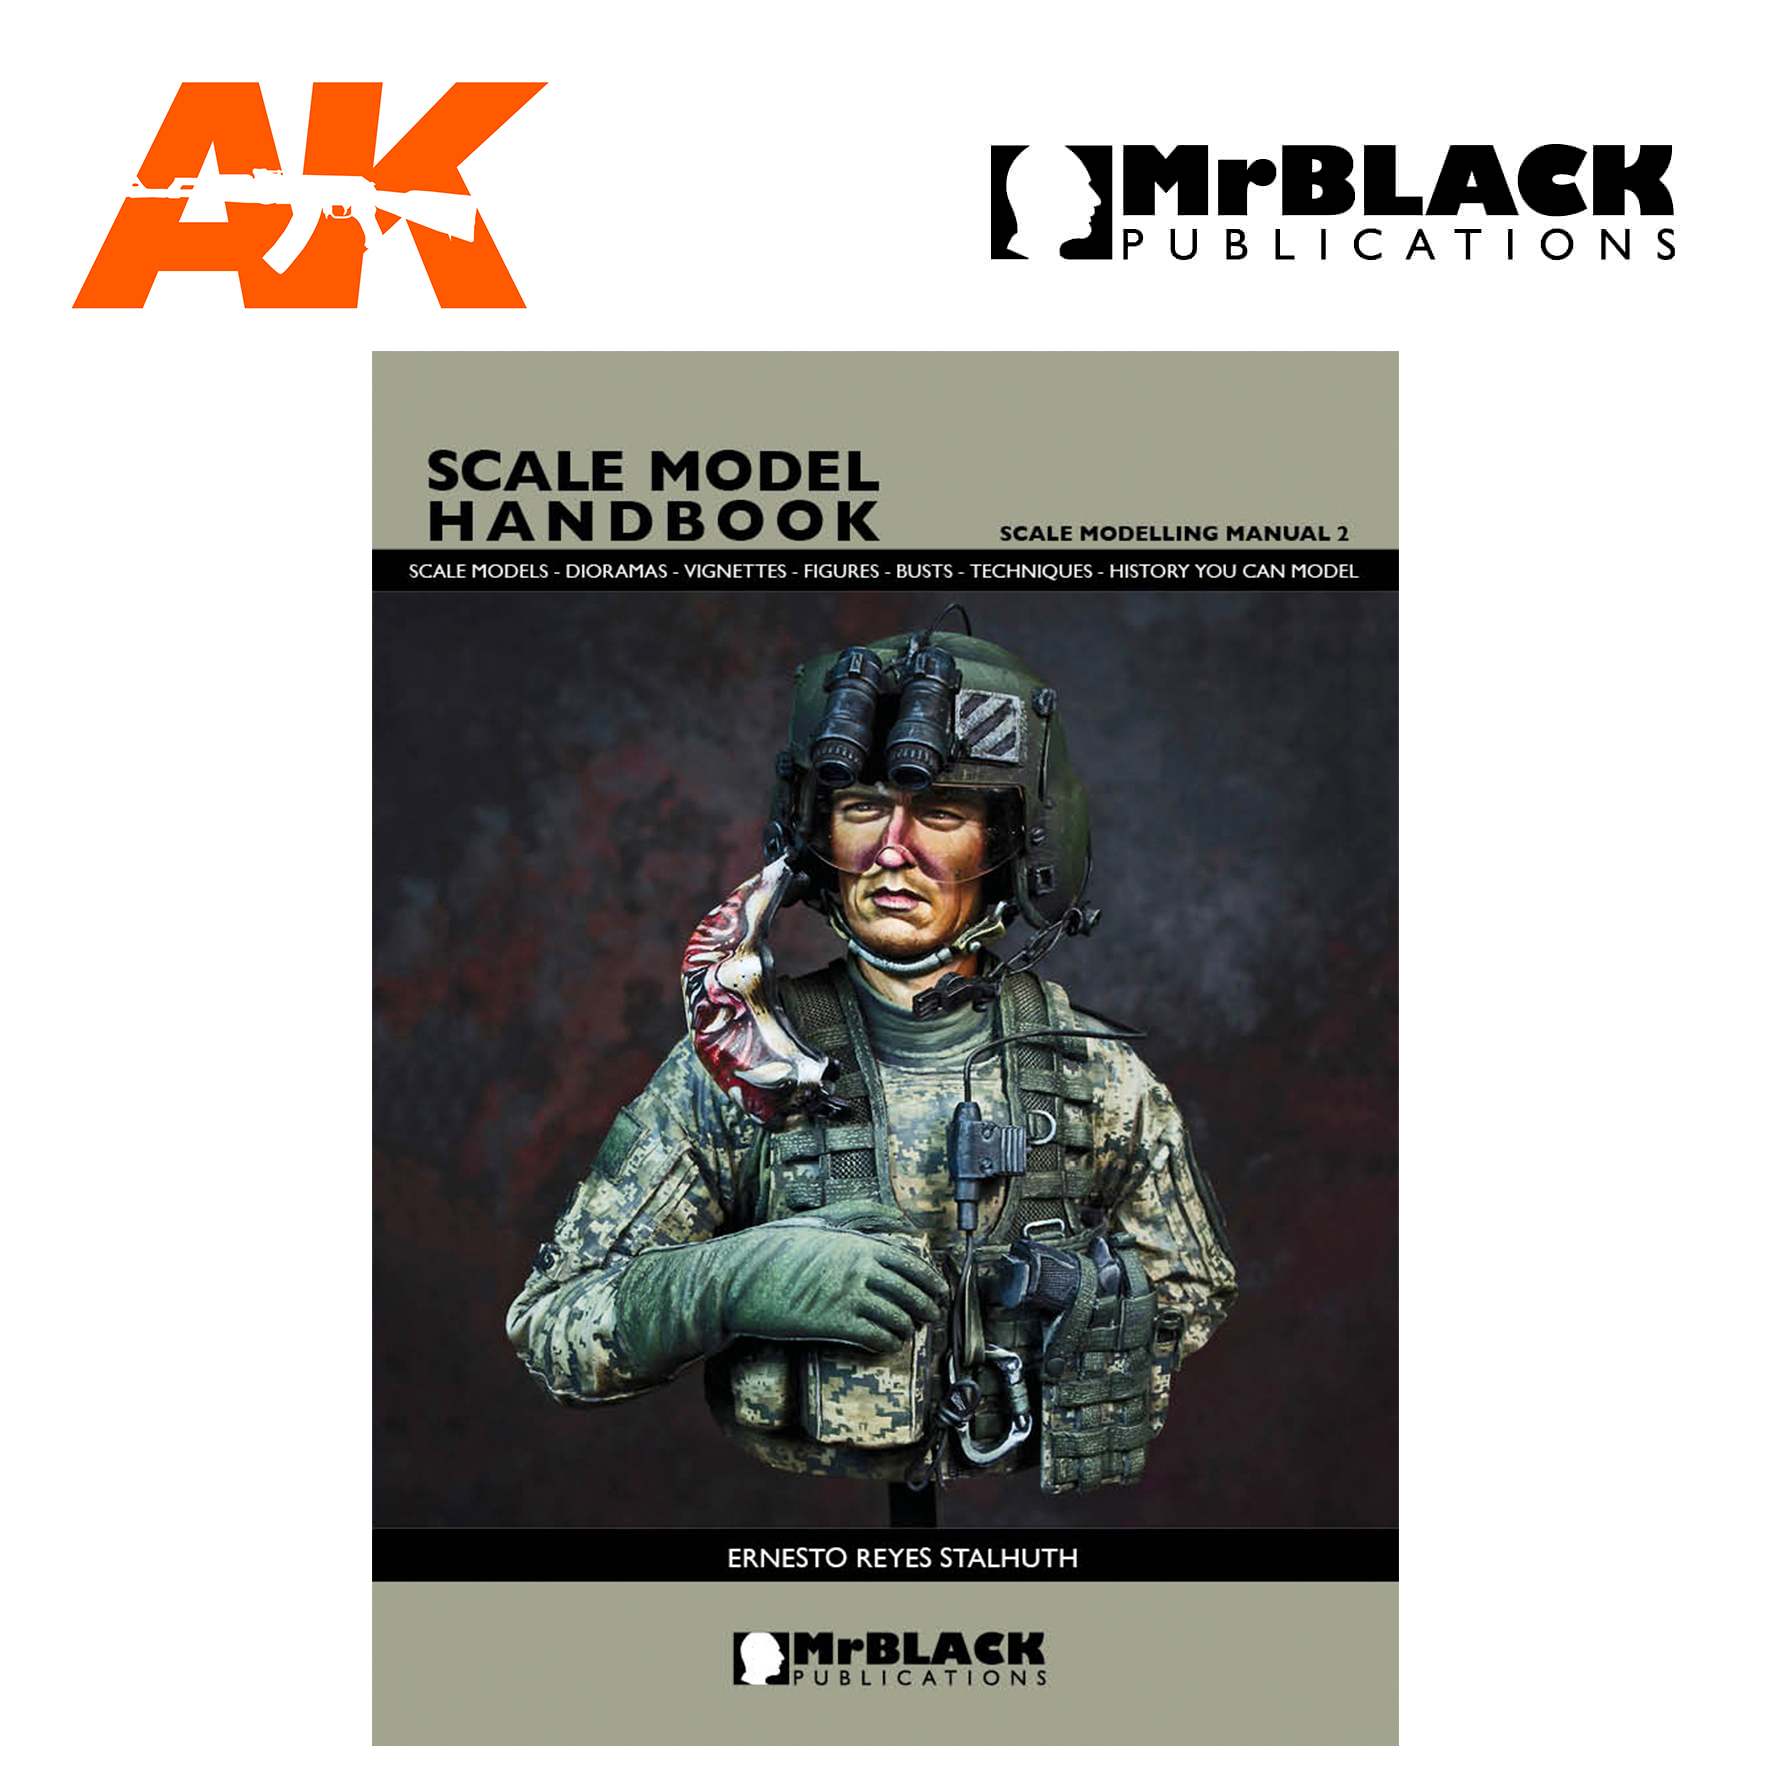 Painting ACU Modern Camouflage Uniform & Equipment, Scale Modelling Manual Vol.2